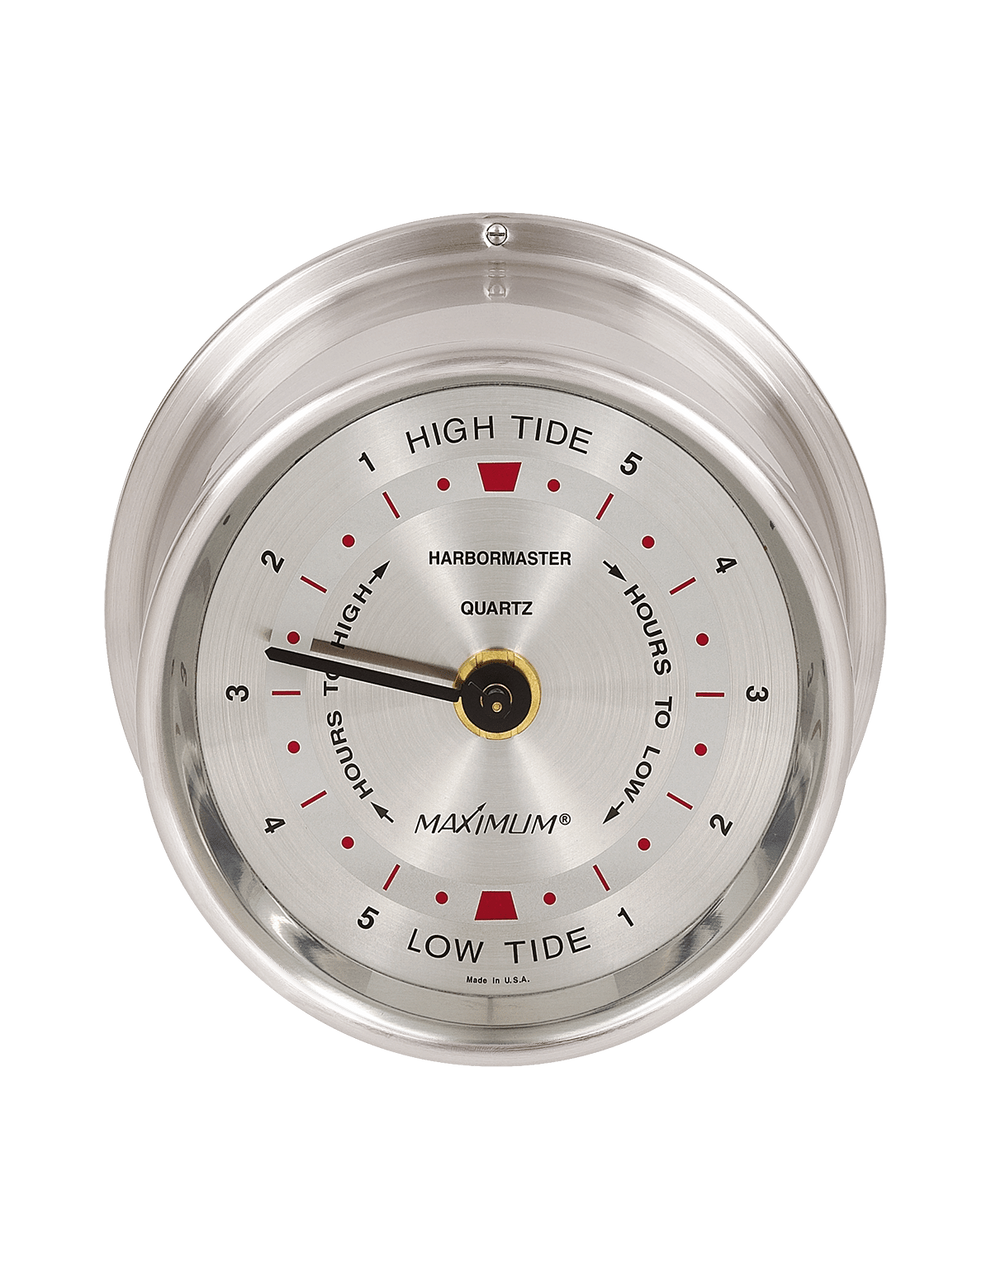 Harbormaster Time and Tide Clock Instrument - Satin Nickel Case - Silver Face